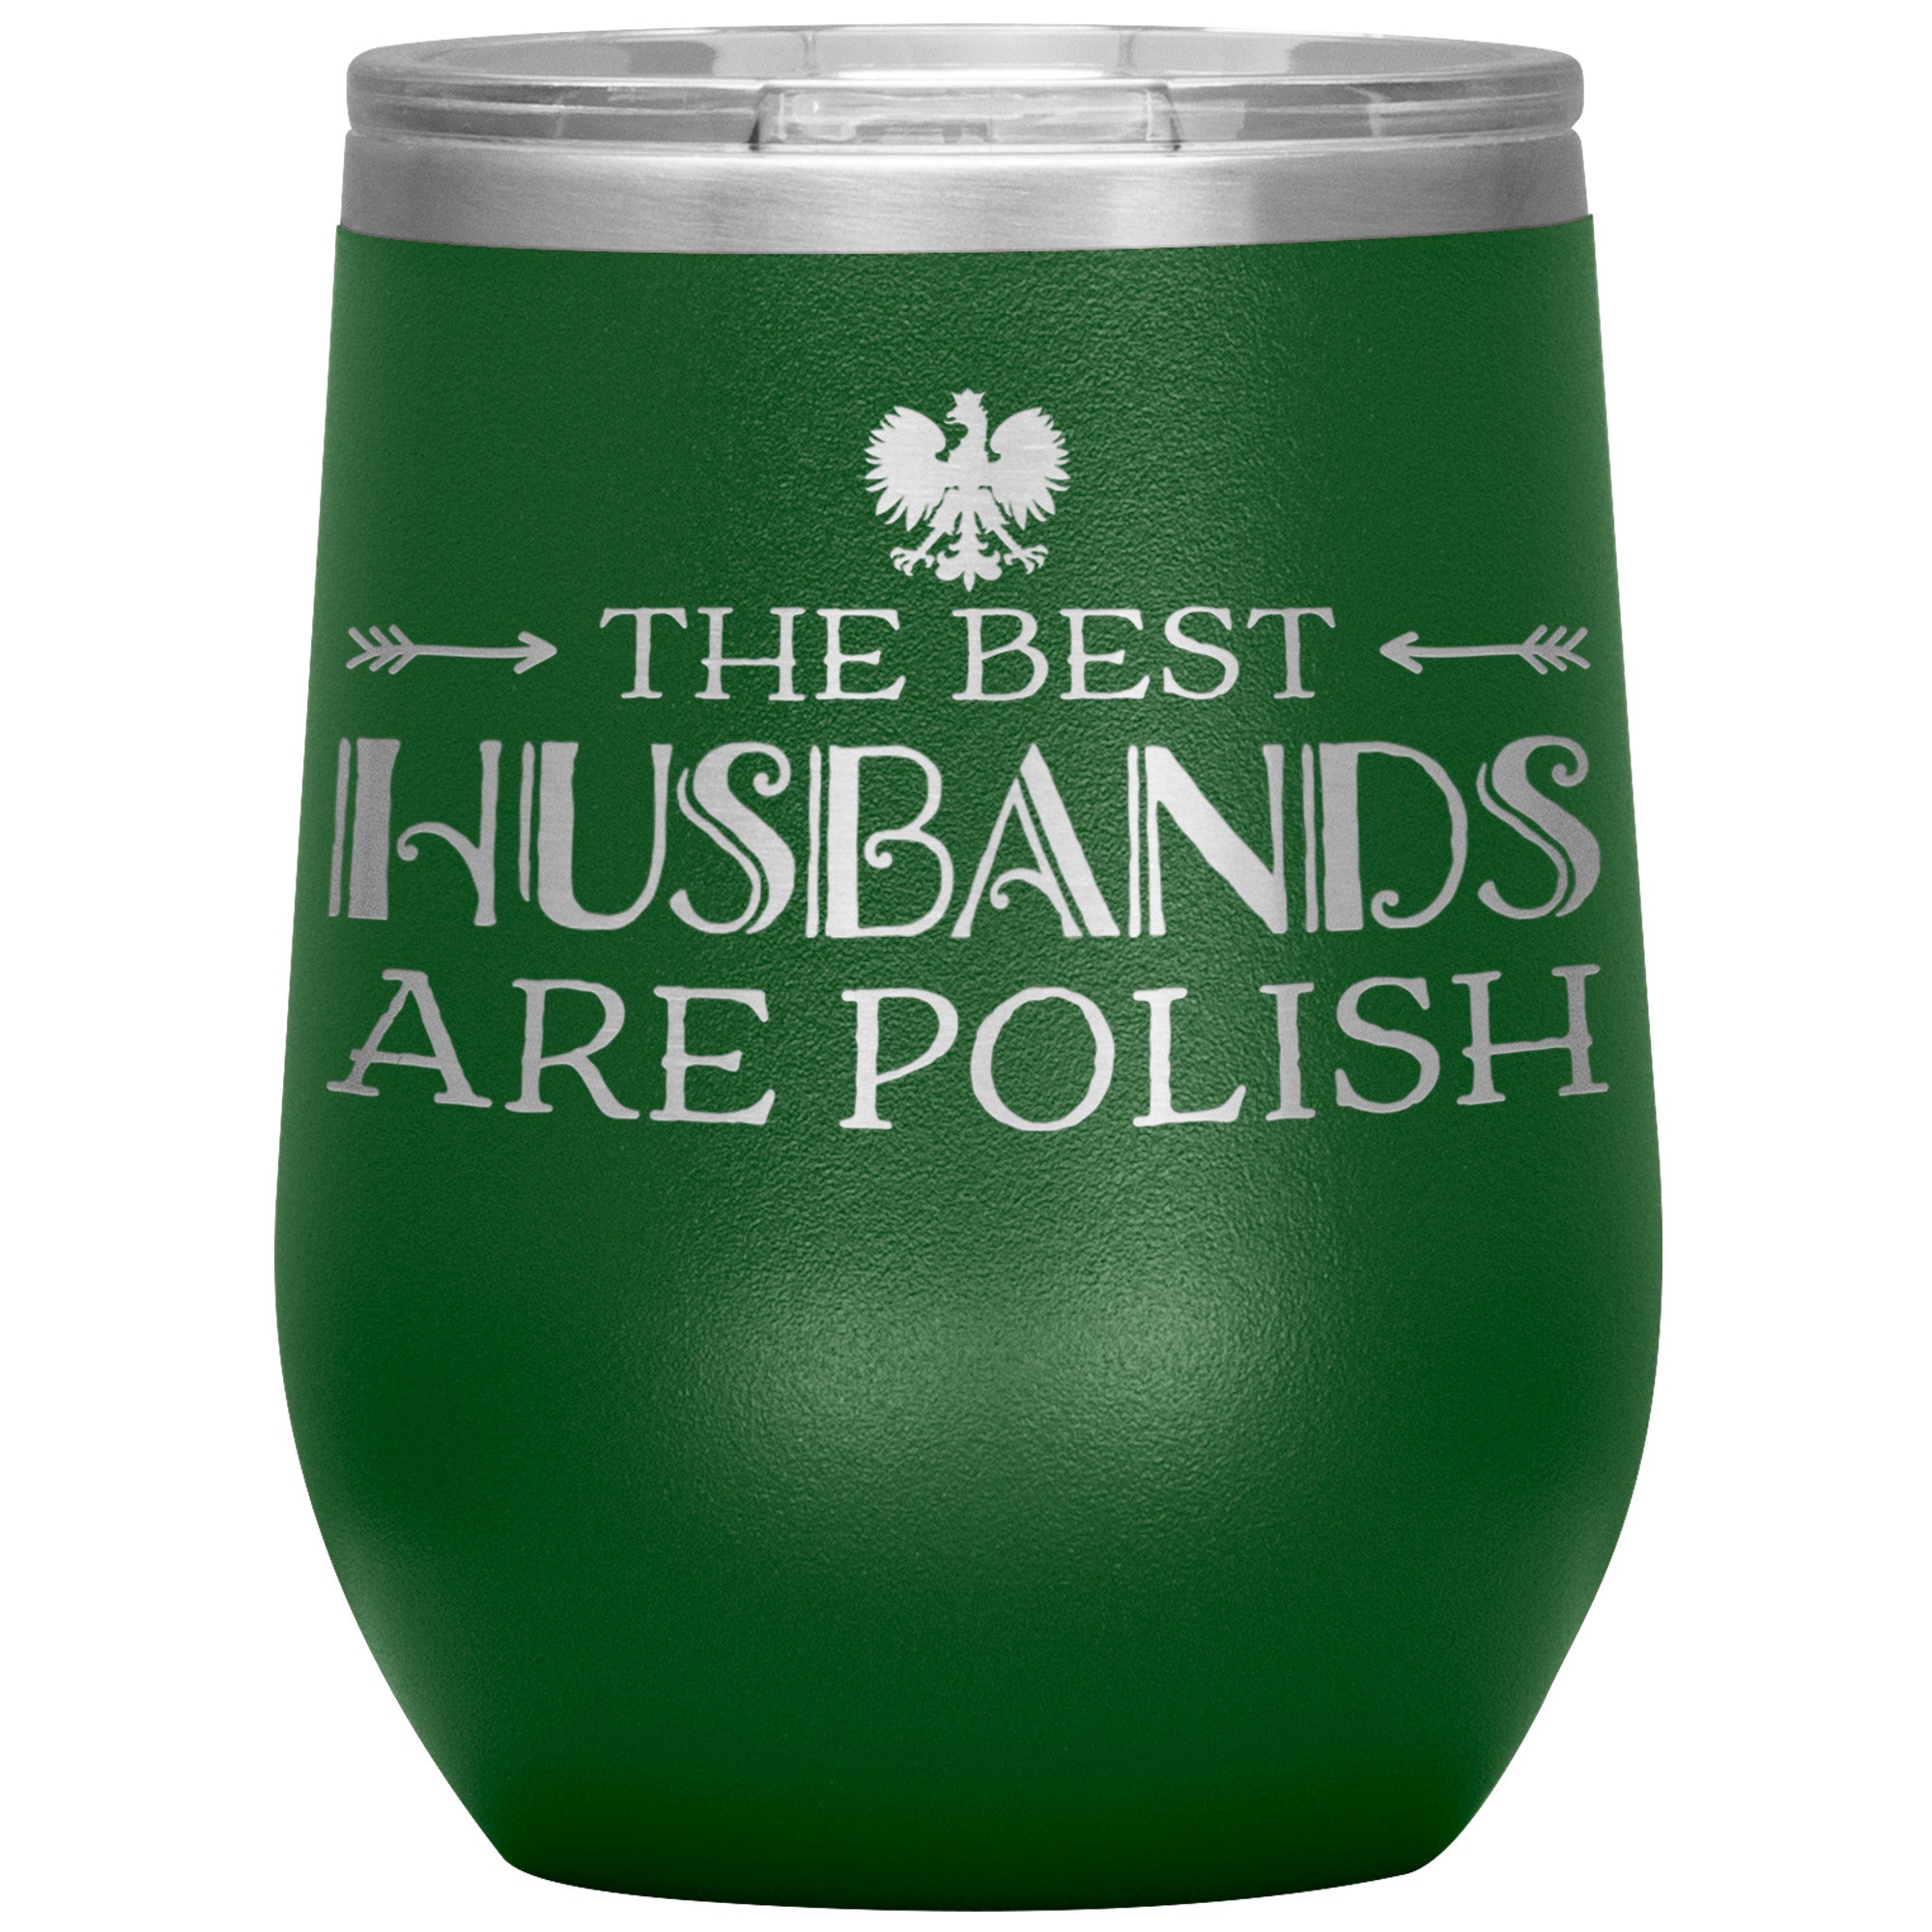 The Best Husbands Are Polish Insulated Wine Tumbler Tumblers teelaunch Green  